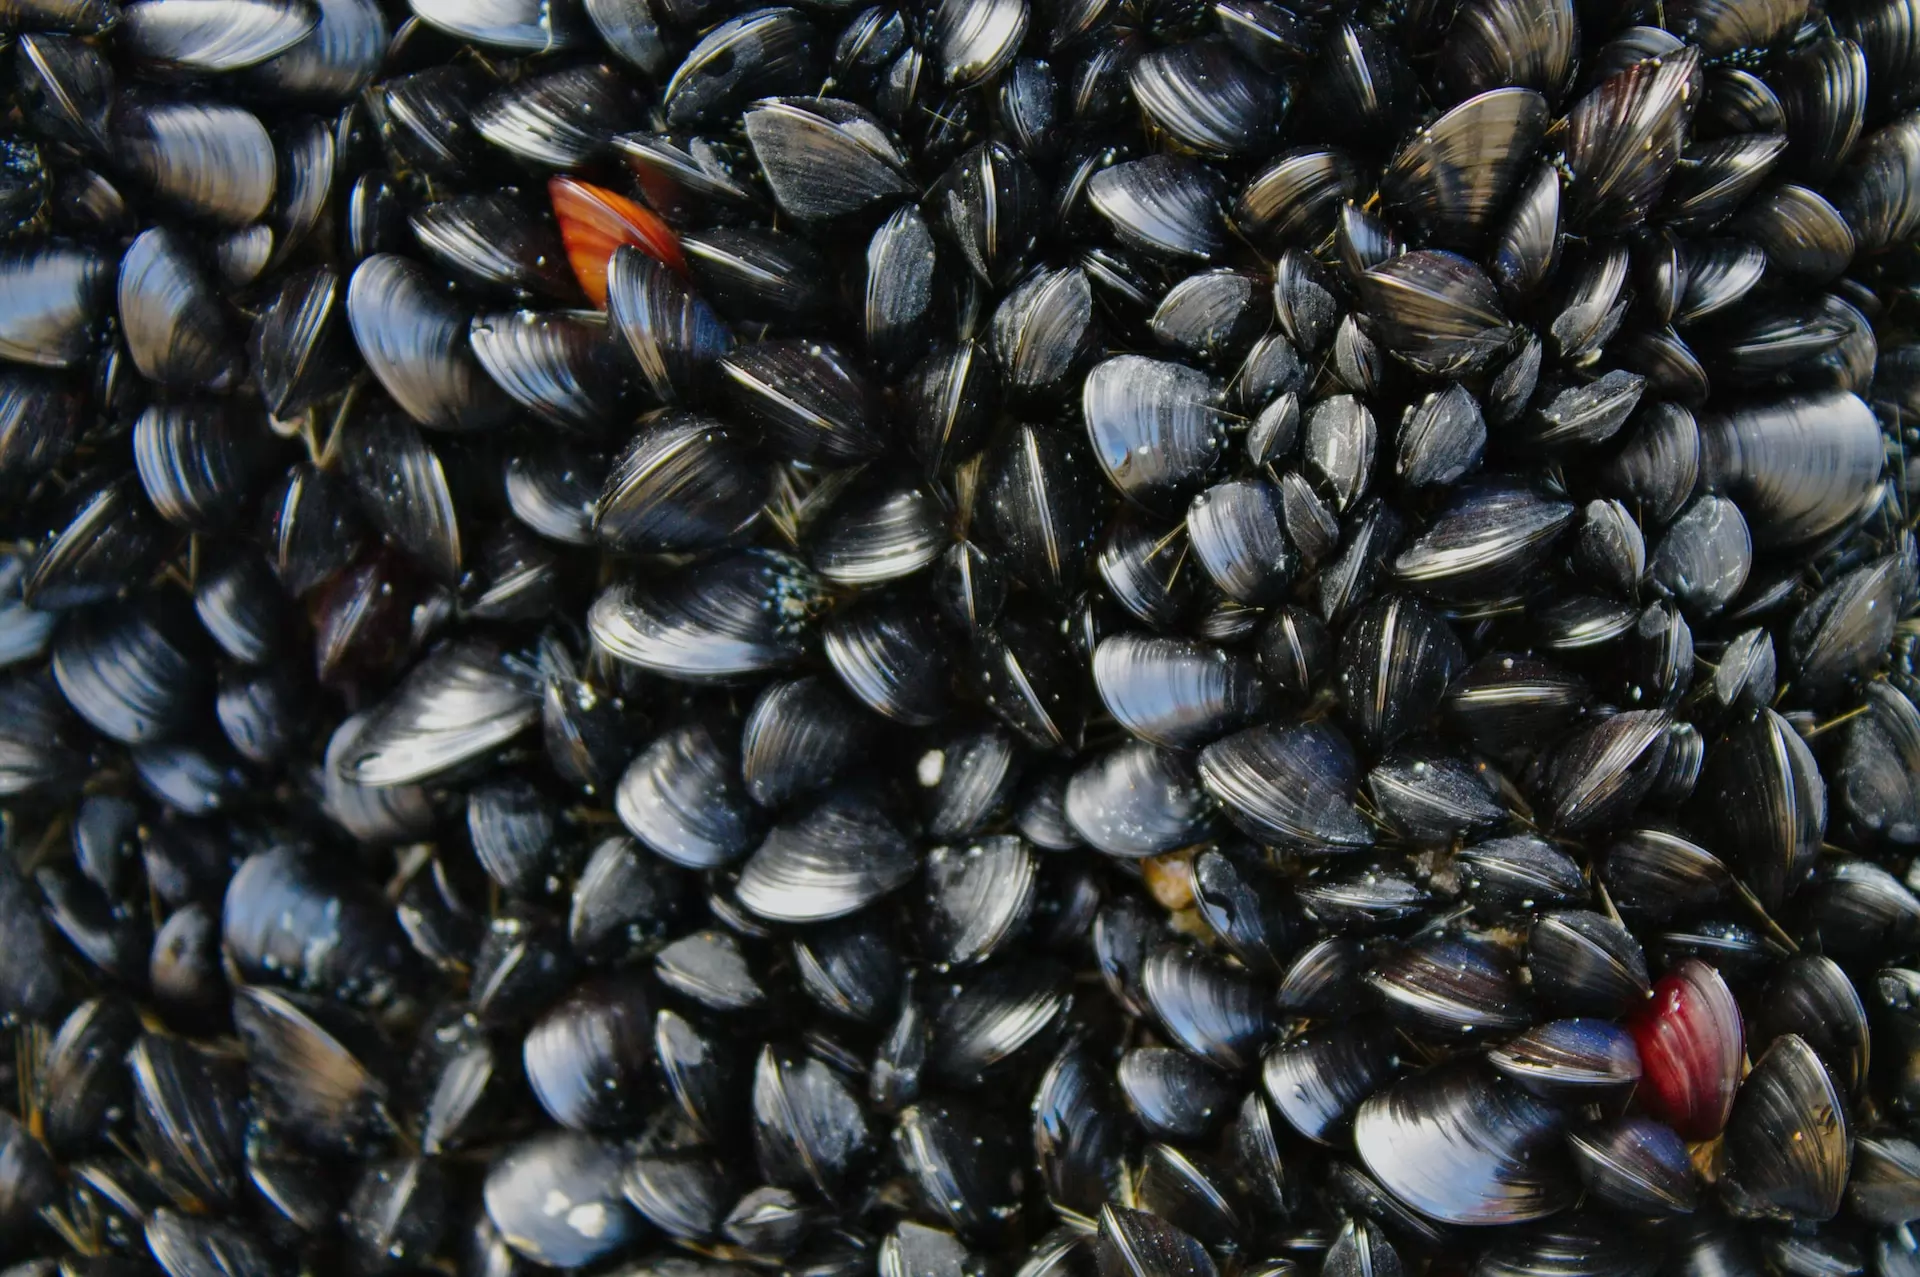 The mussel market